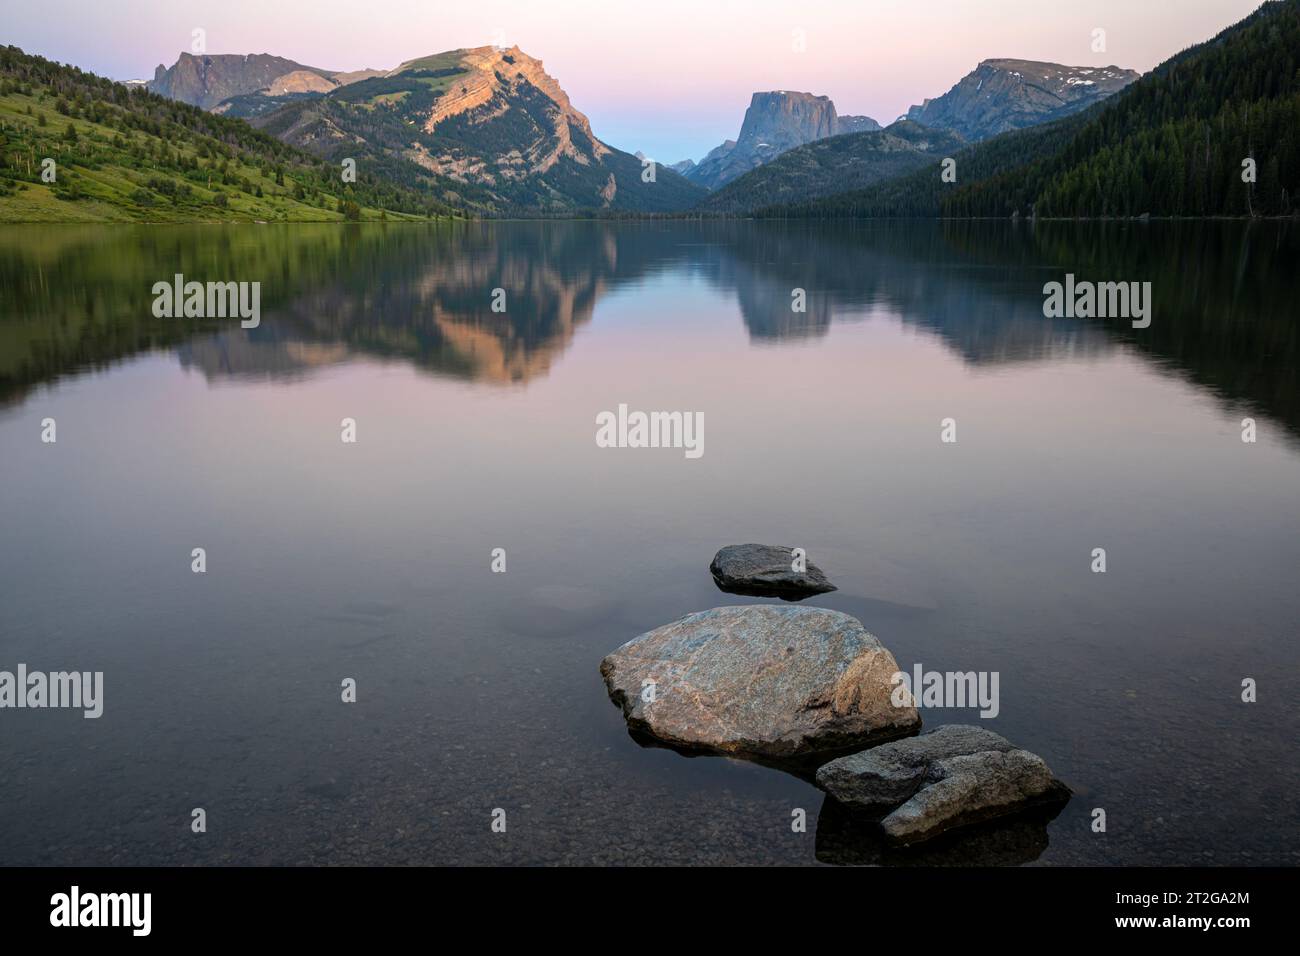 WY05299-00...WYOMING - Rocks along the shore of Green River Lake with Squaretop Mountain in the distance at sunset in Bridger National Forest. Stock Photo